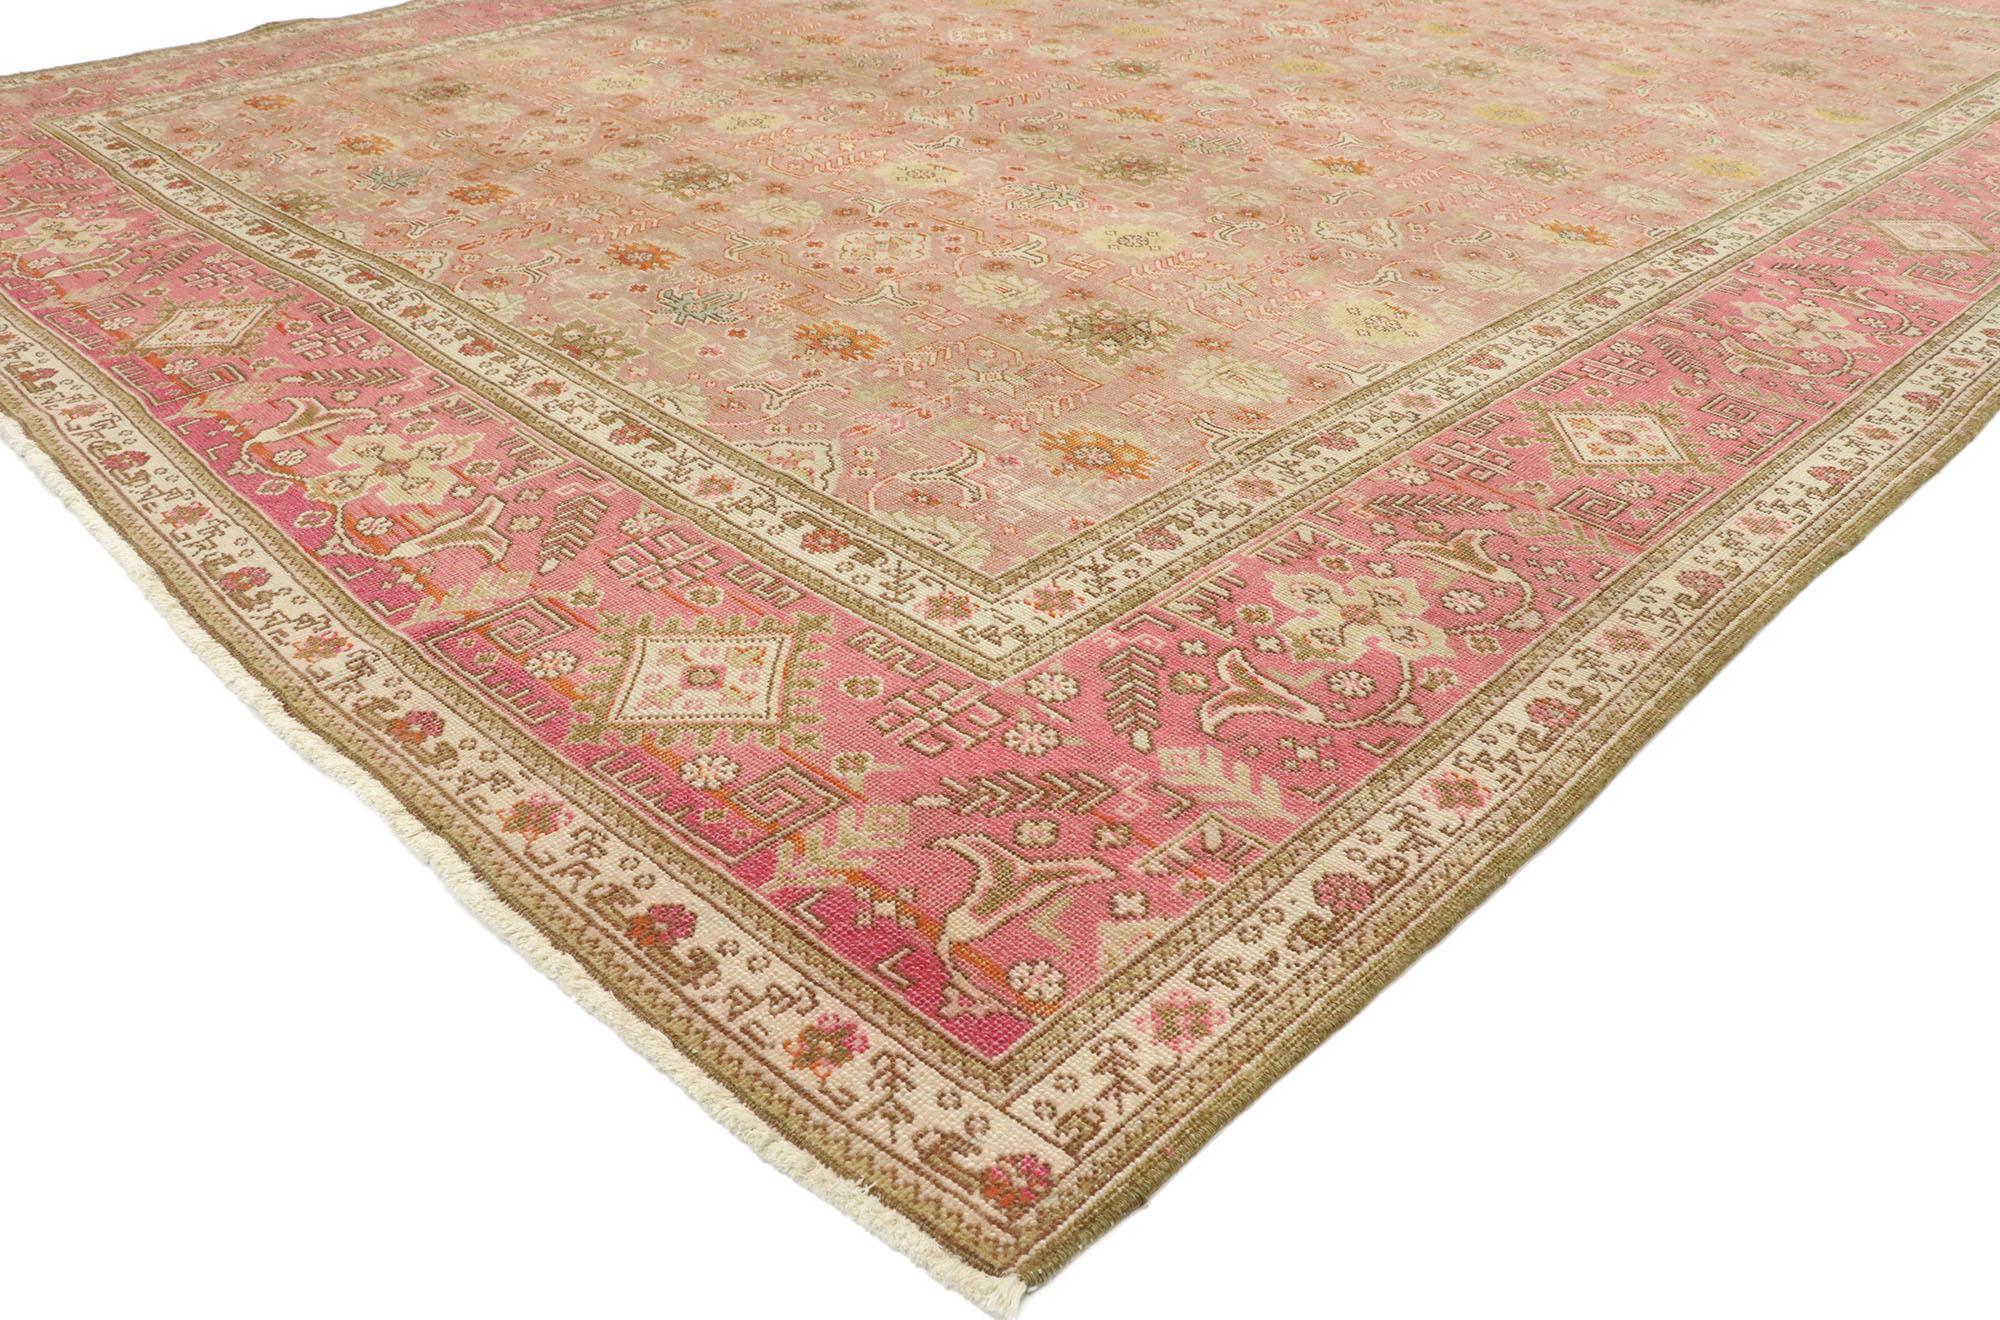 53163 distressed vintage Persian Tabriz rug with Romantic Boho Chic style with its well-balanced symmetry and tribal charm with rosy pink hues, this hand knotted wool vintage Persian Tabriz rug beautifully embodies a romantic boho chic style. The